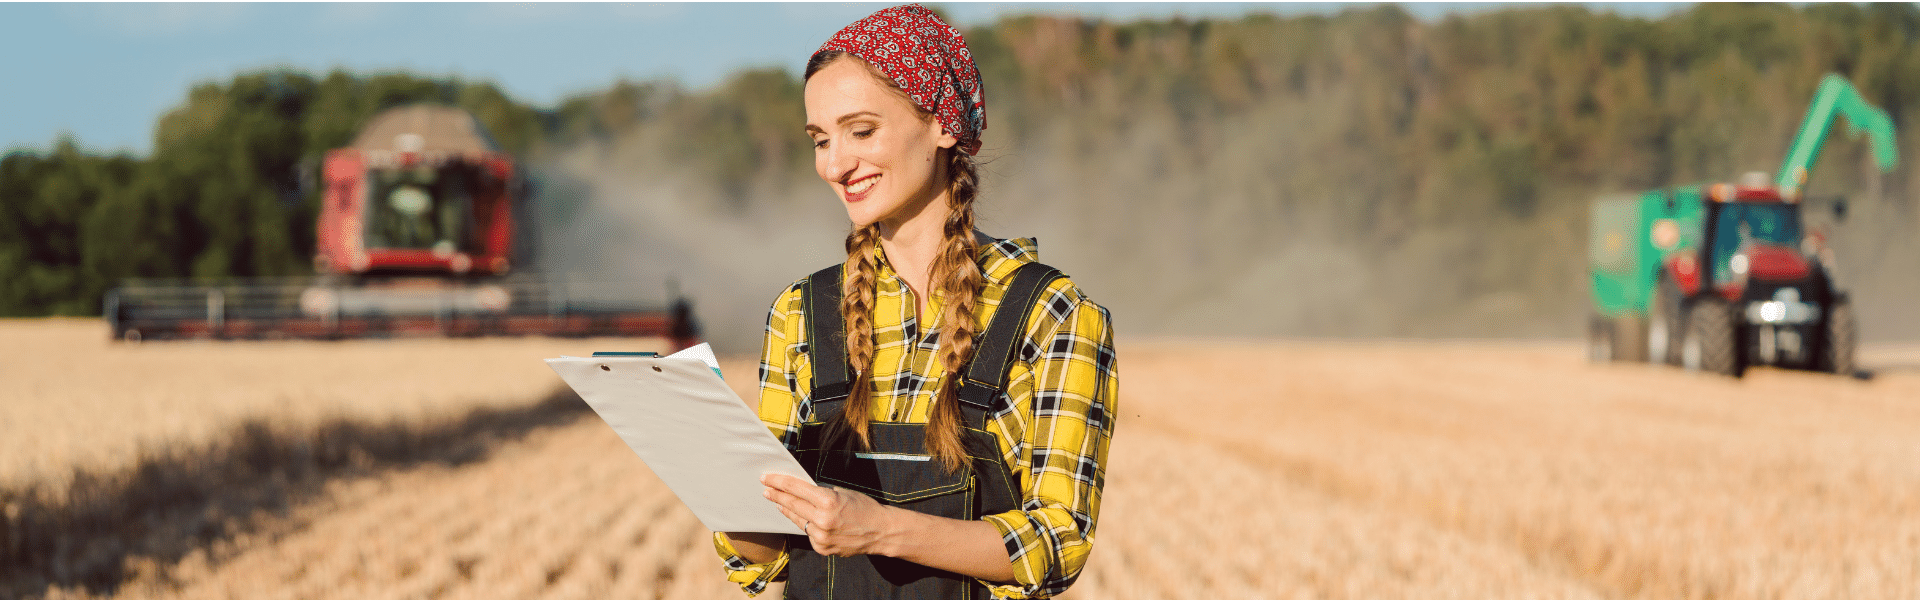 Farmer in field checking off to do list with tractors behind her